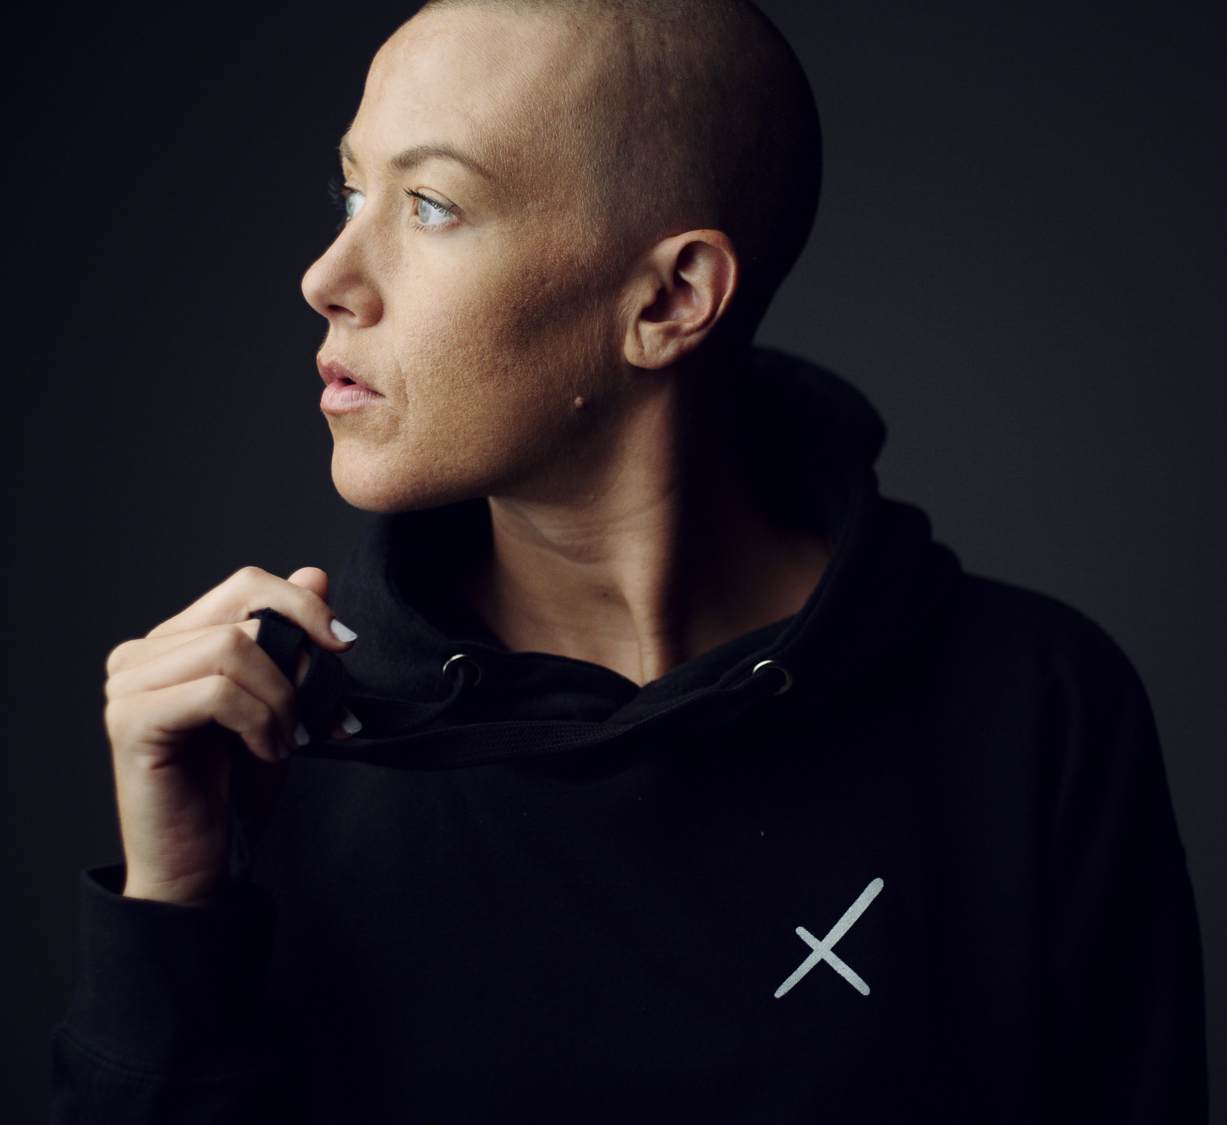 Uncreative Shop Headshot of female model with shaved head looking off to the side wearing black jacket with white Uncreative logo